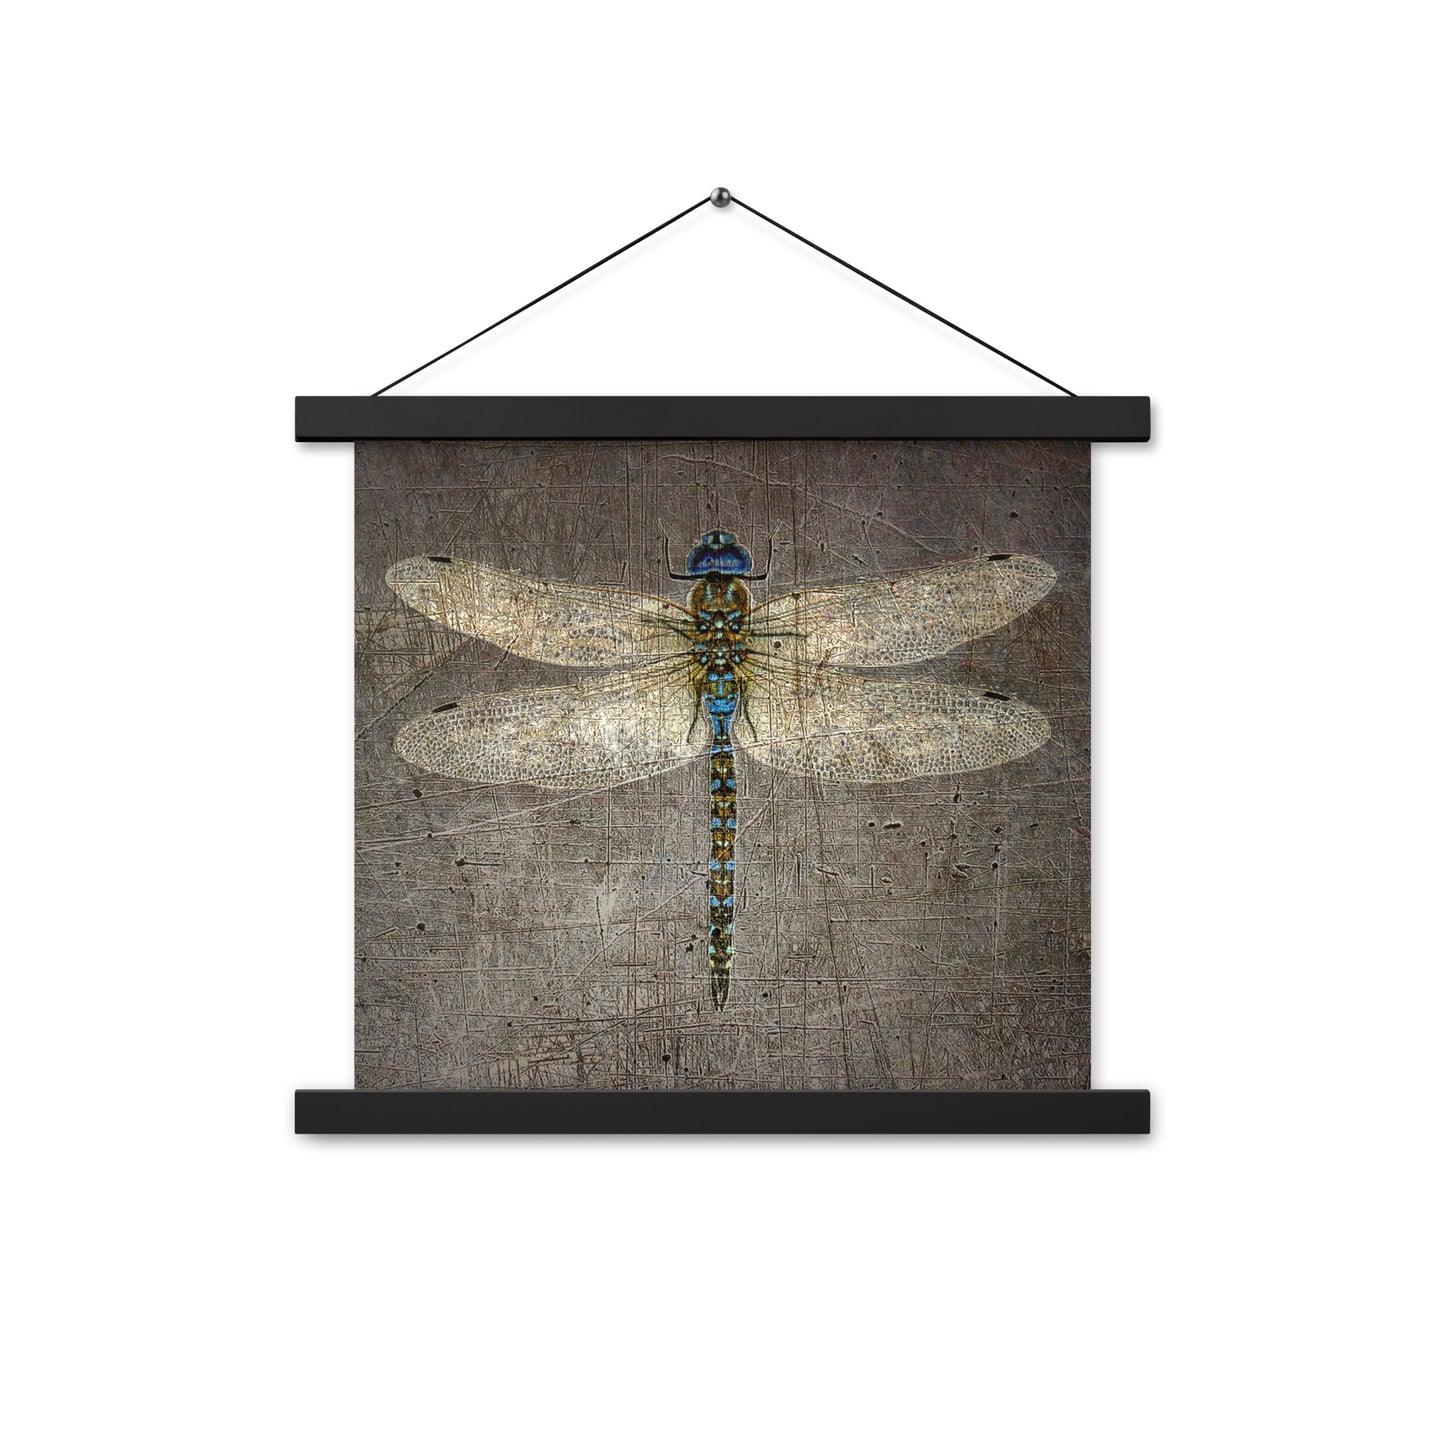 Dragonfly Themed Wall Hanging Dragonfly on Distressed Stone Background Print on Archival Paper with Magnetic Wood Hangers 10x10